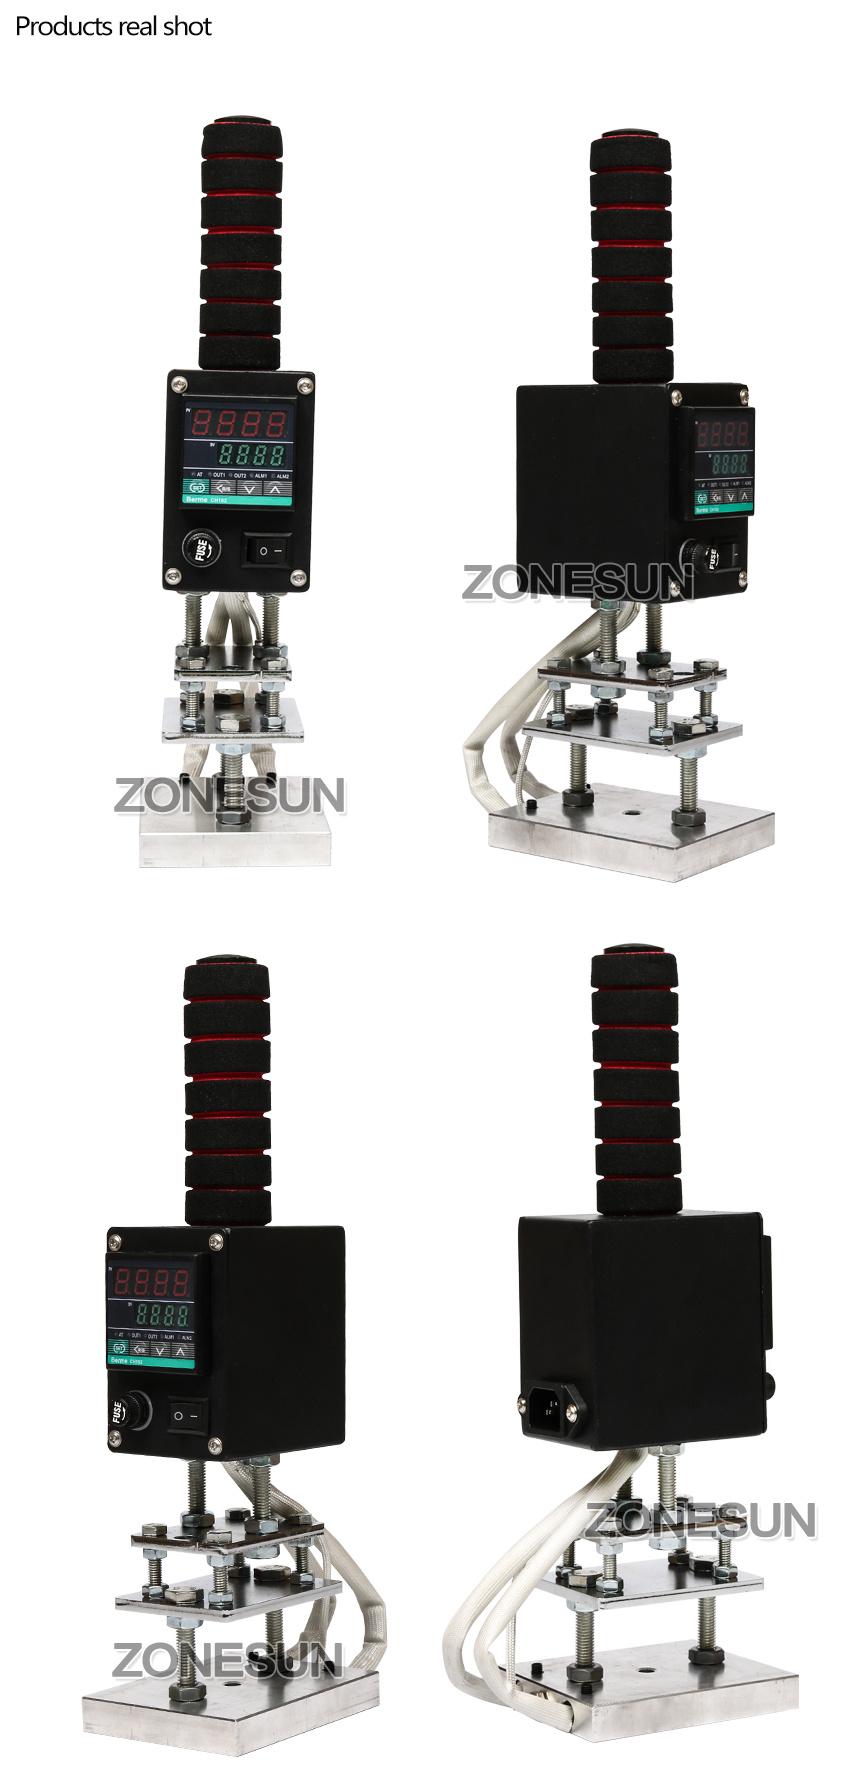 Zonesun Handheld Leather Wood PVC Hot Foil Stamping Machine Leather Embossing Tool Wood Burning Machine